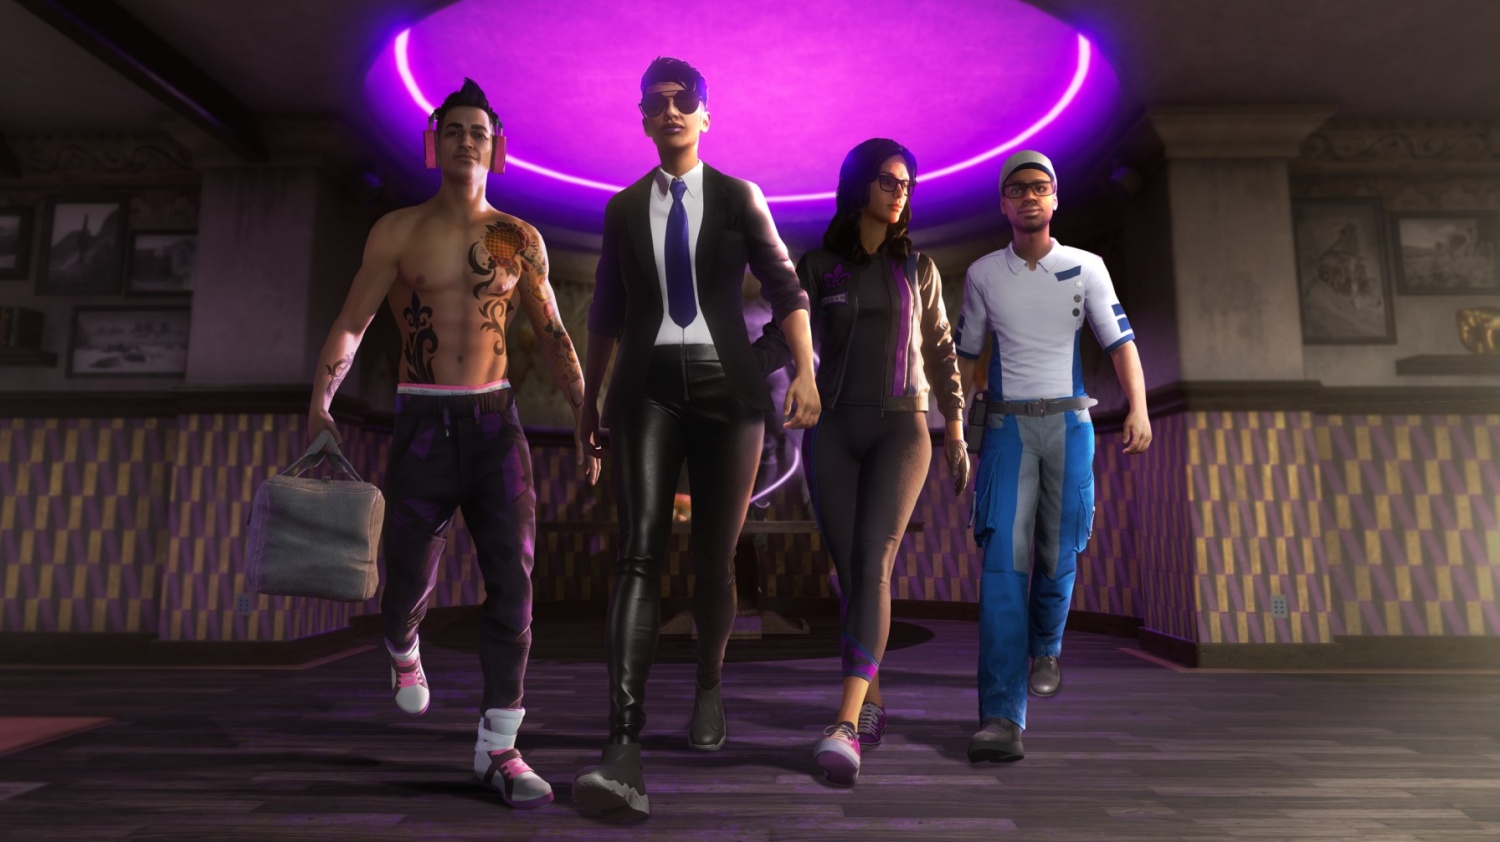 'Saints Row' Gets New DLC Called The Heist & The Hazardous Helicopter